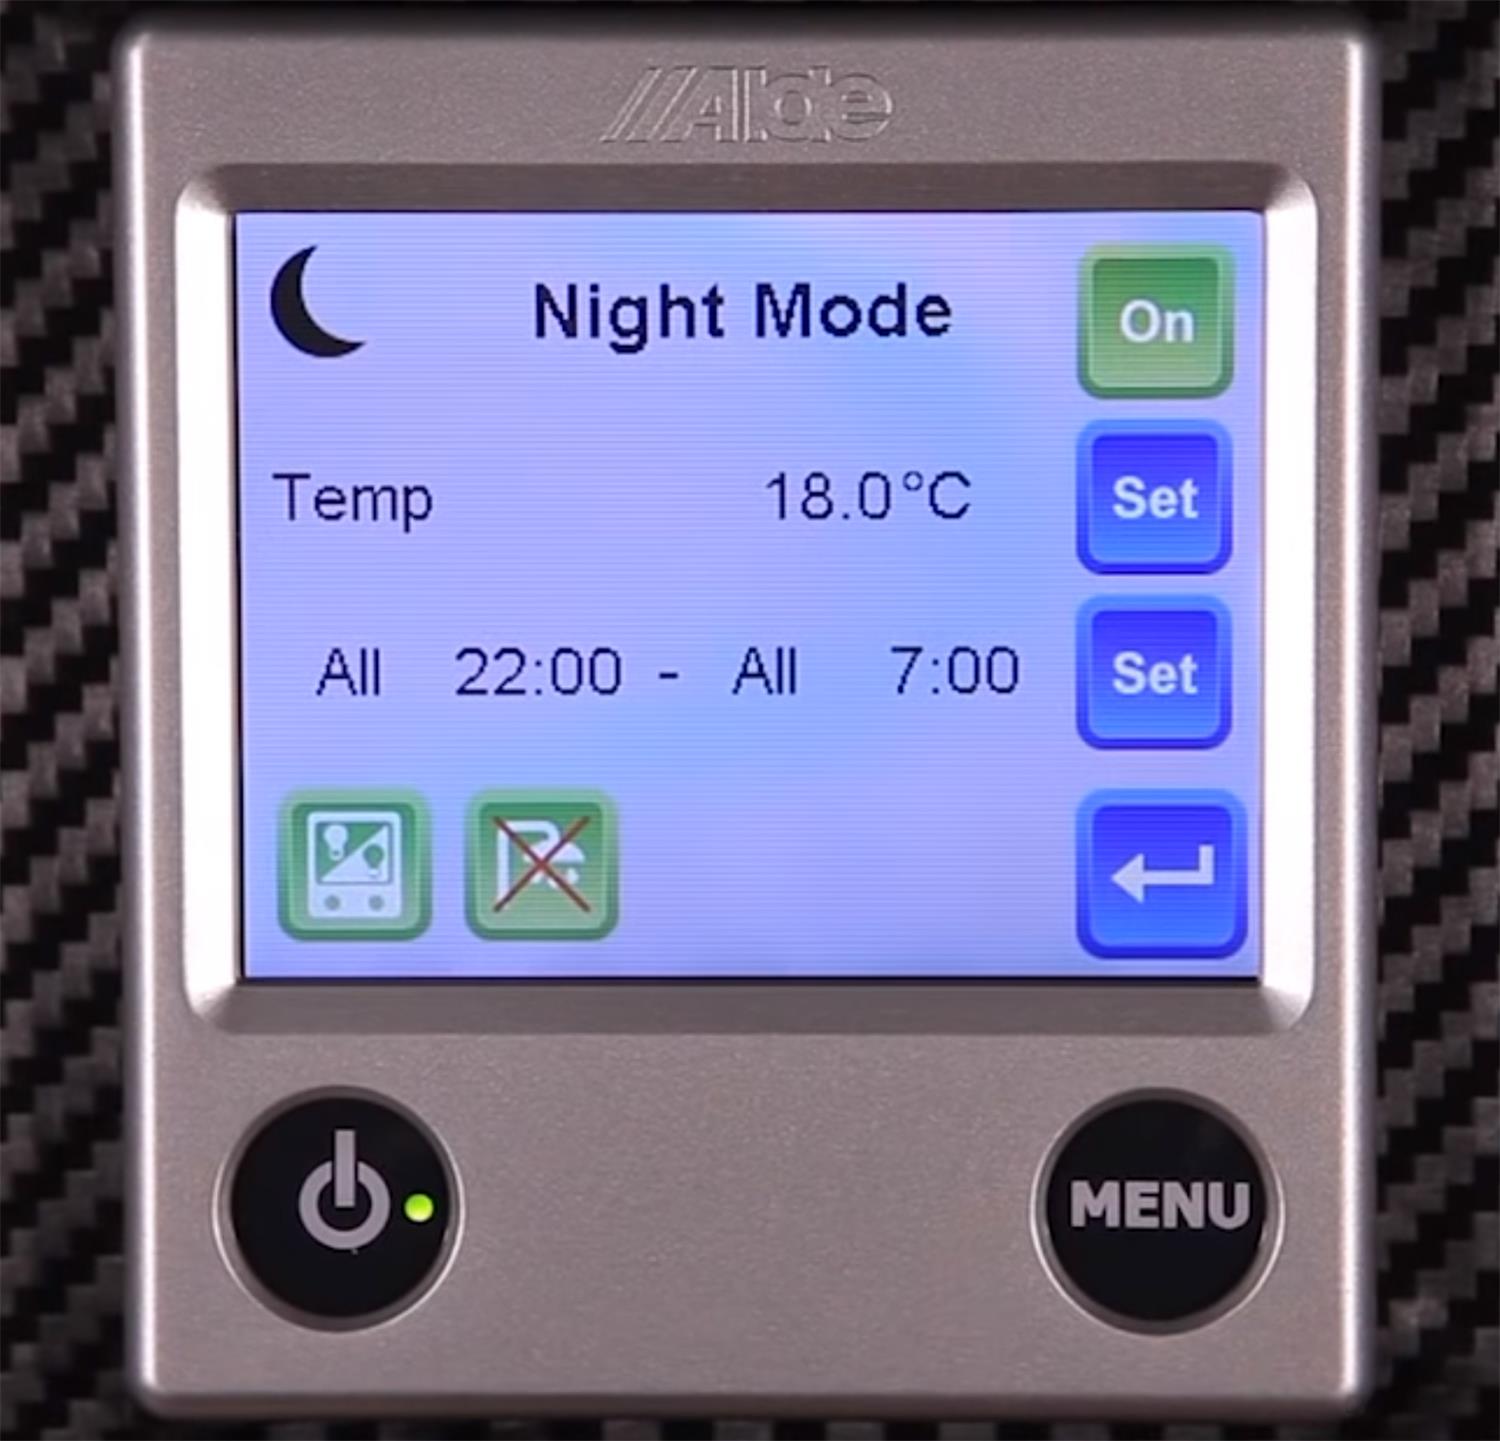 Alde 3020 Control panel, setting the night time functions.